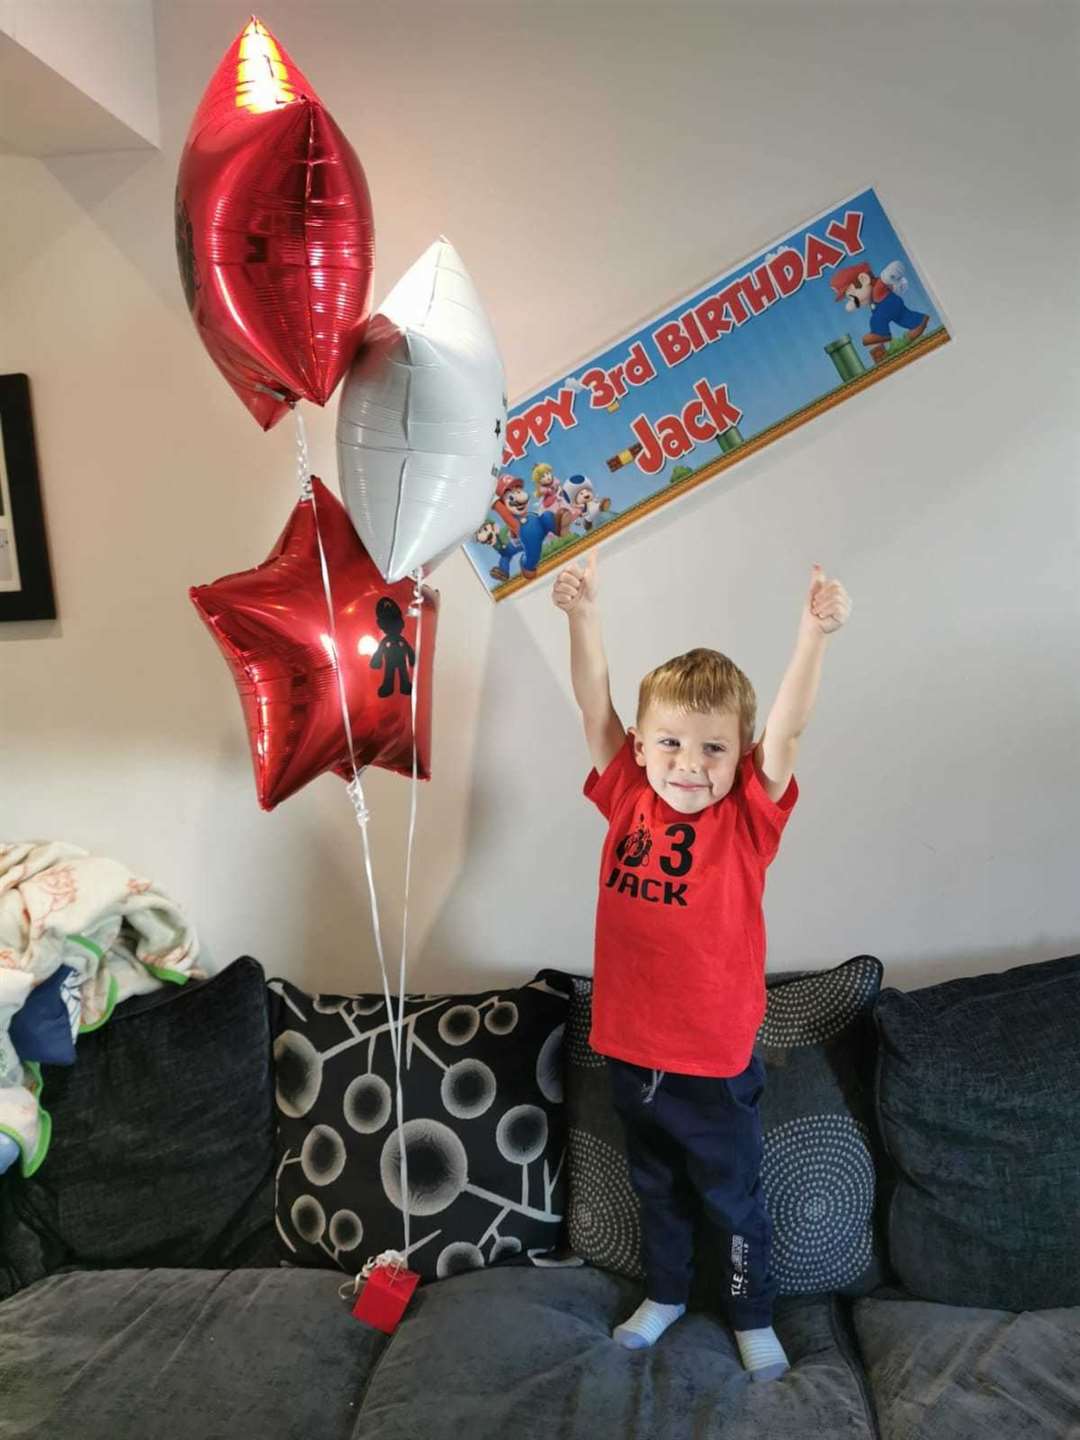 Jack is now 3